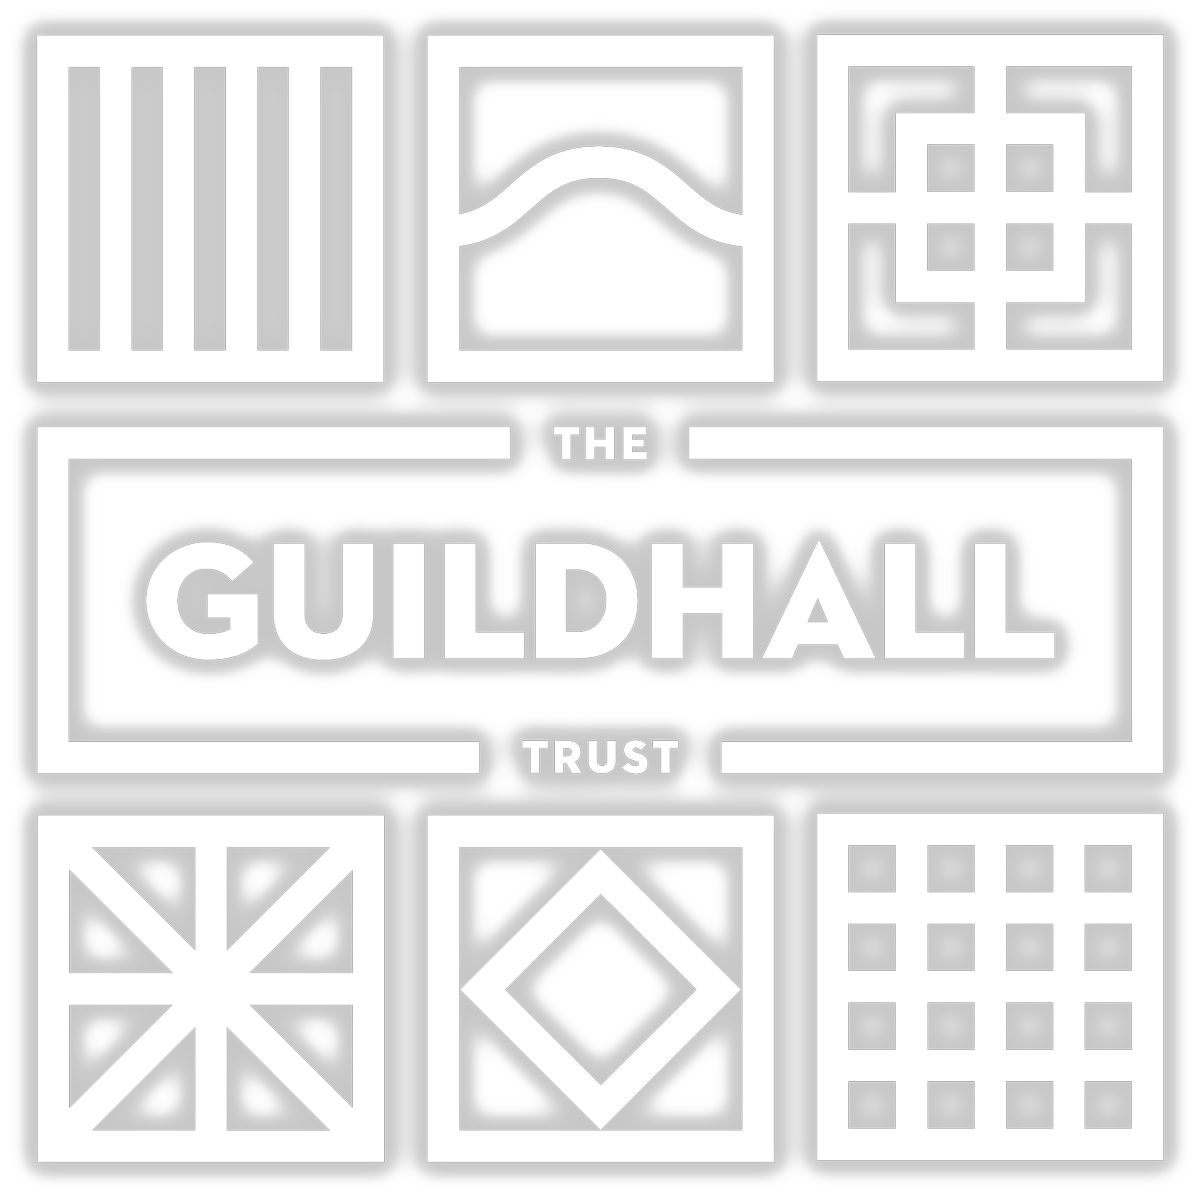 Management specialists at the Guildhall Trust.